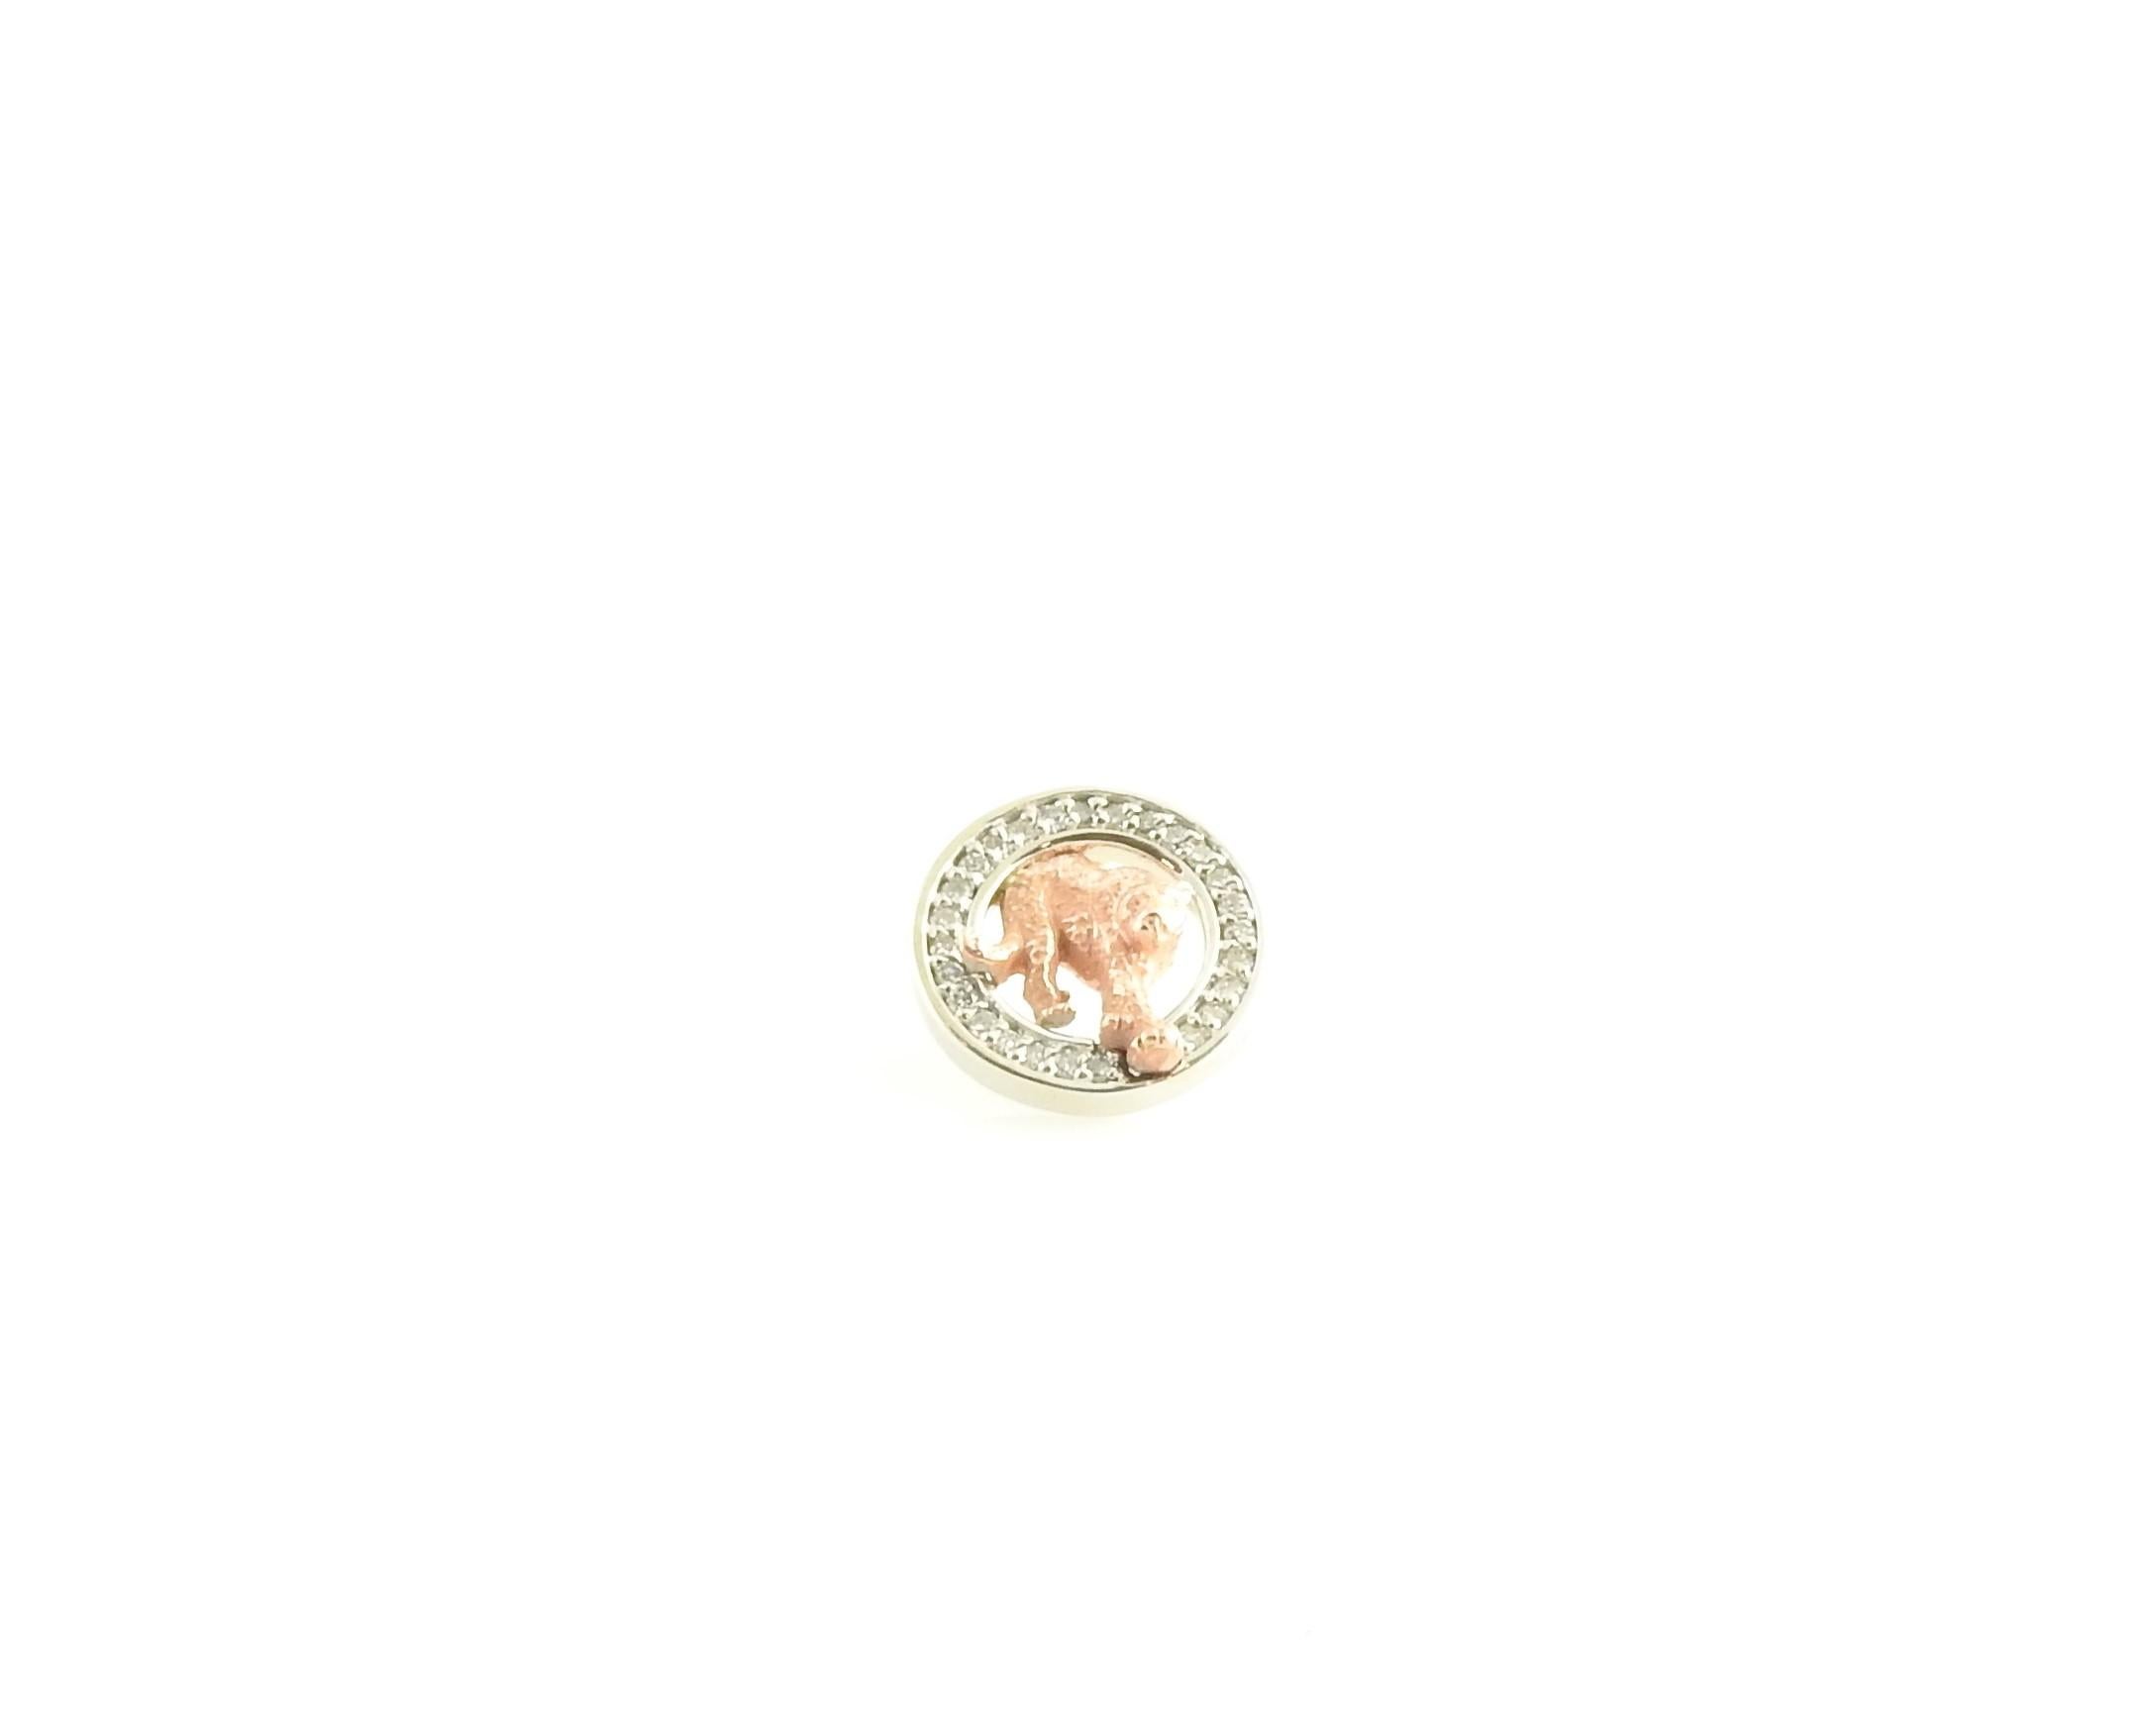 Vintage 14 Karat Rose and White Gold Diamond Tiger Tie Tack

This elegant tie tack features a beautifully crafted rose gold tiger surrounded with 26 round brilliant cut diamonds set in classic 14K white gold.

Approximate total diamond weight: .13